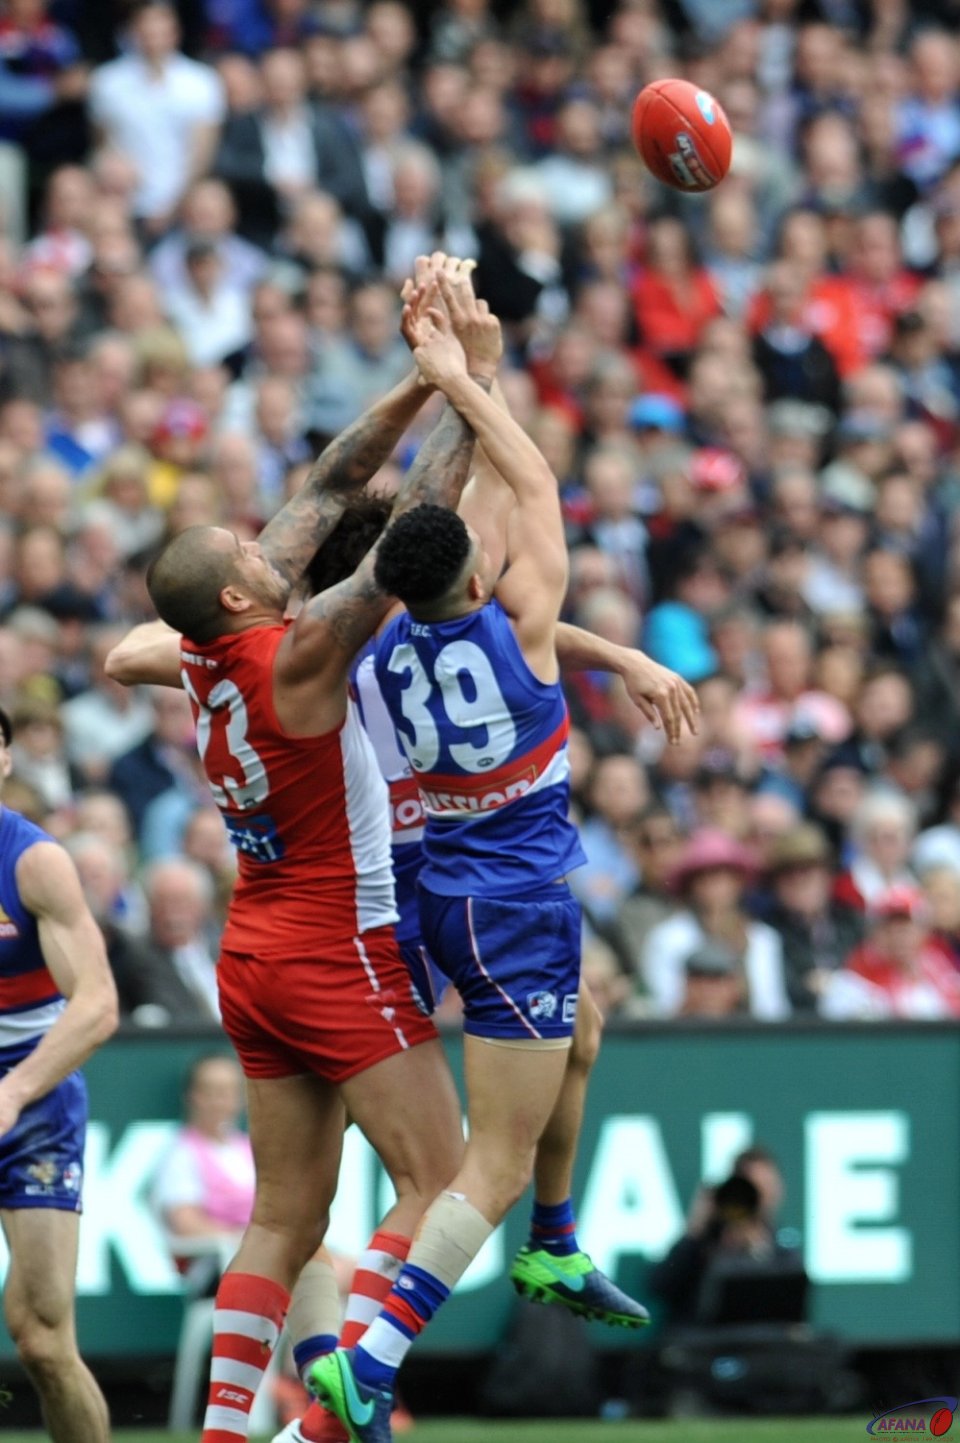 Johannisen defends and Franklin attacks as the Swans bomb the ball into their forward 50 